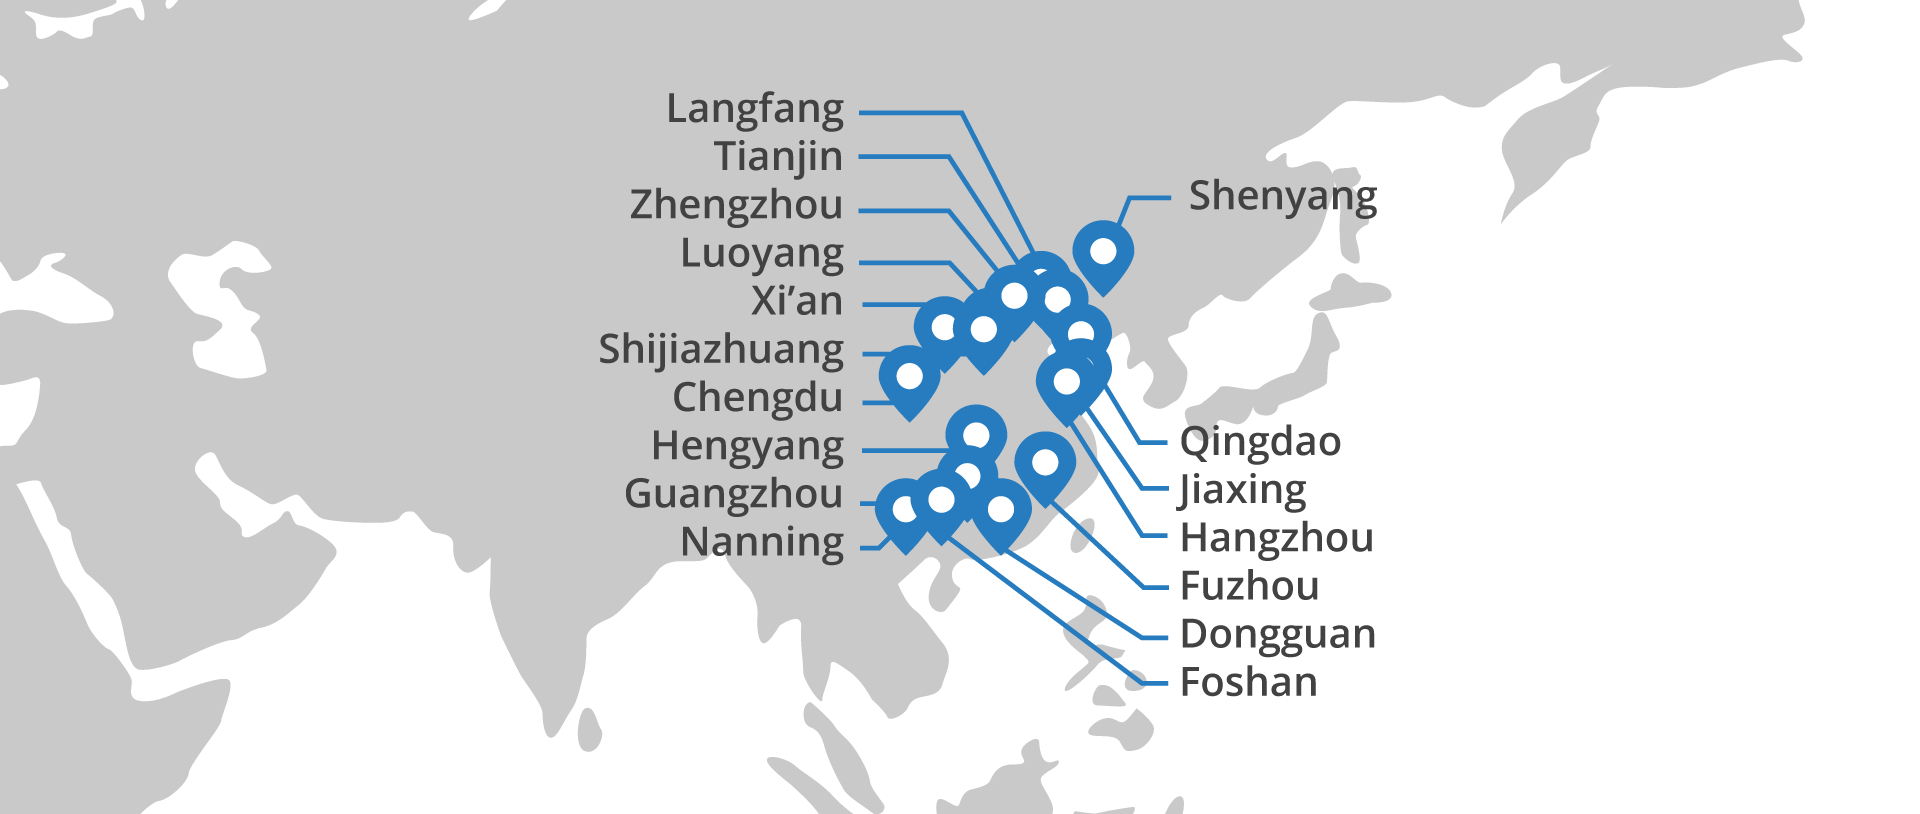 CloudFlare's Network in China